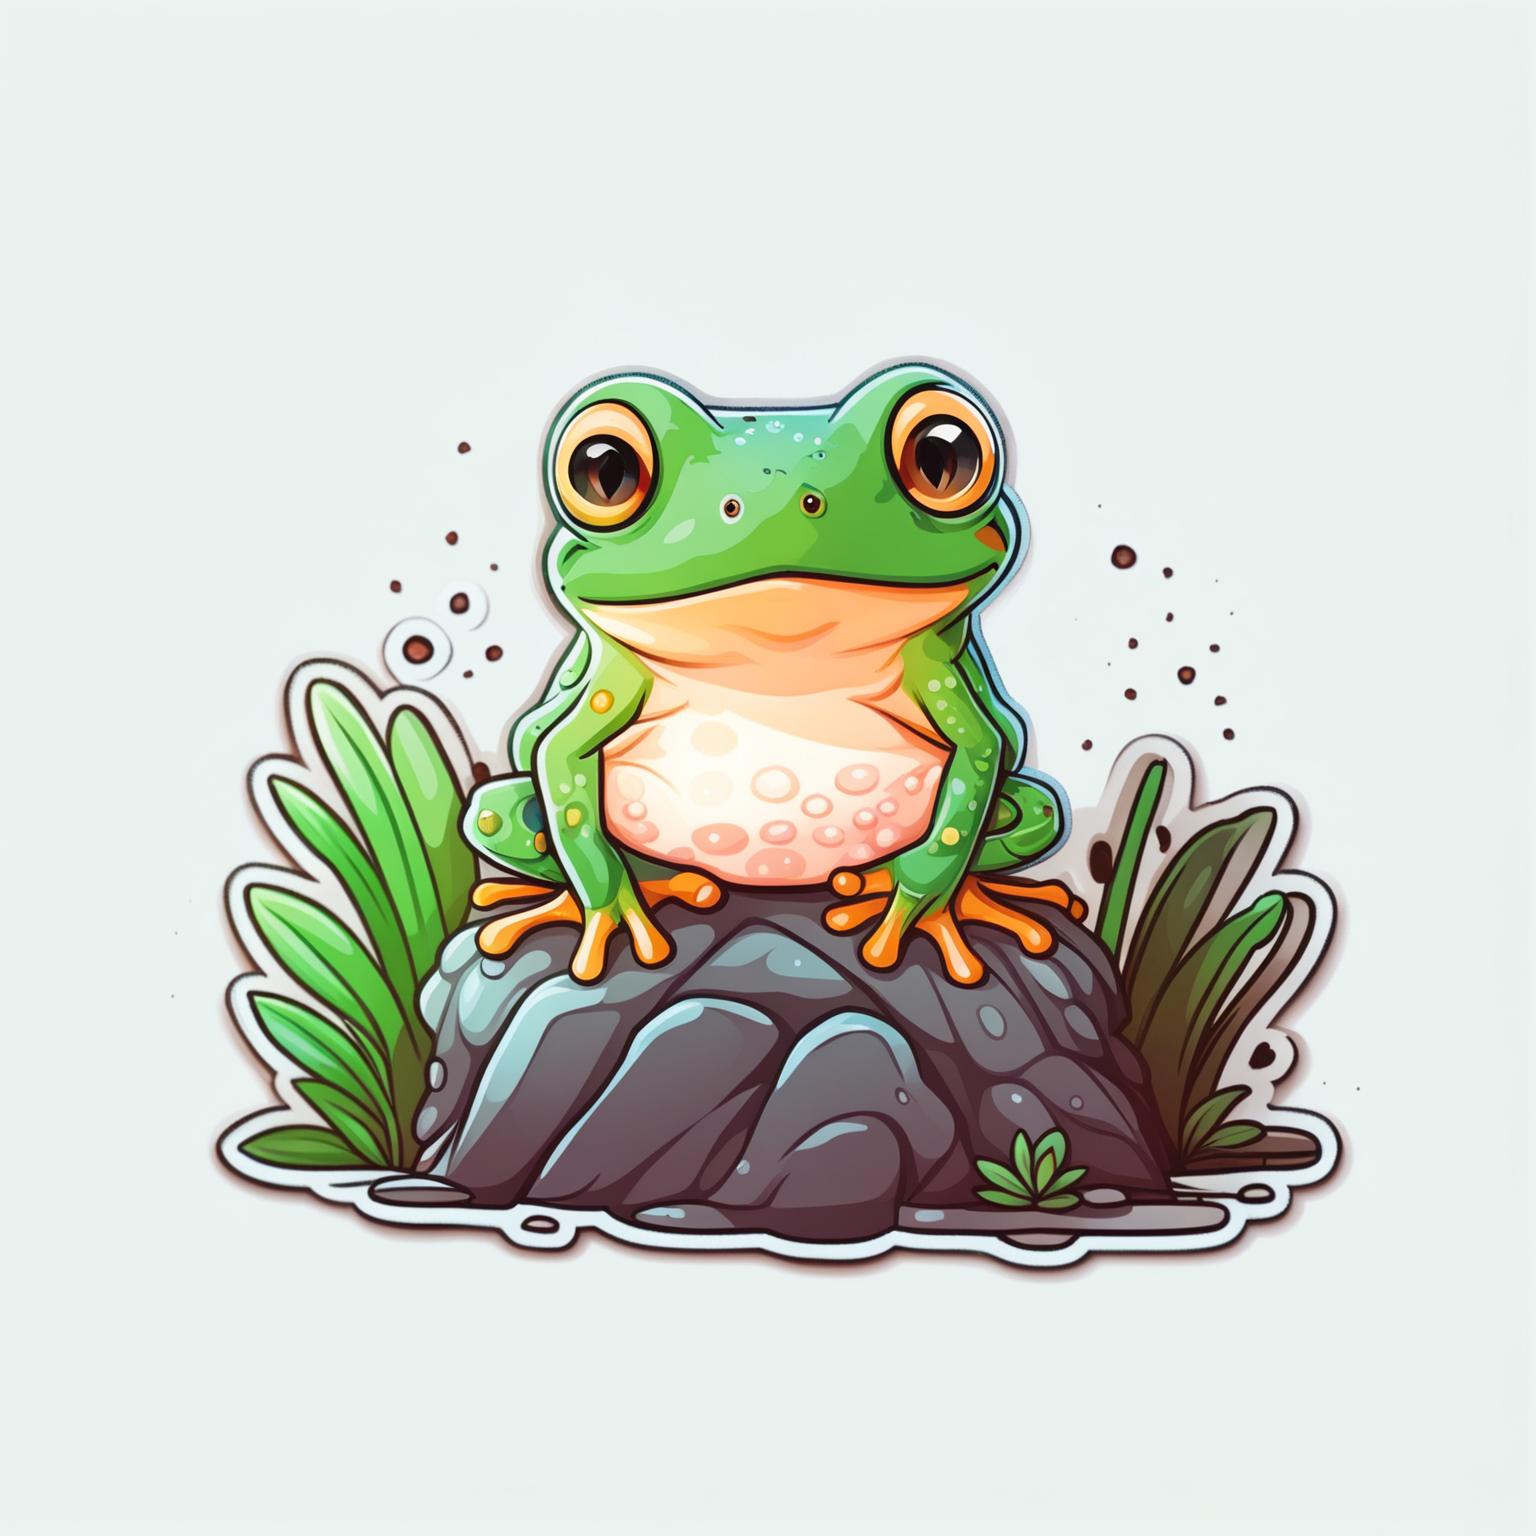 Sticker design of an adorable frog sitting on a rock with a cute expression, surrounded by small flowers, grass, and leaves.